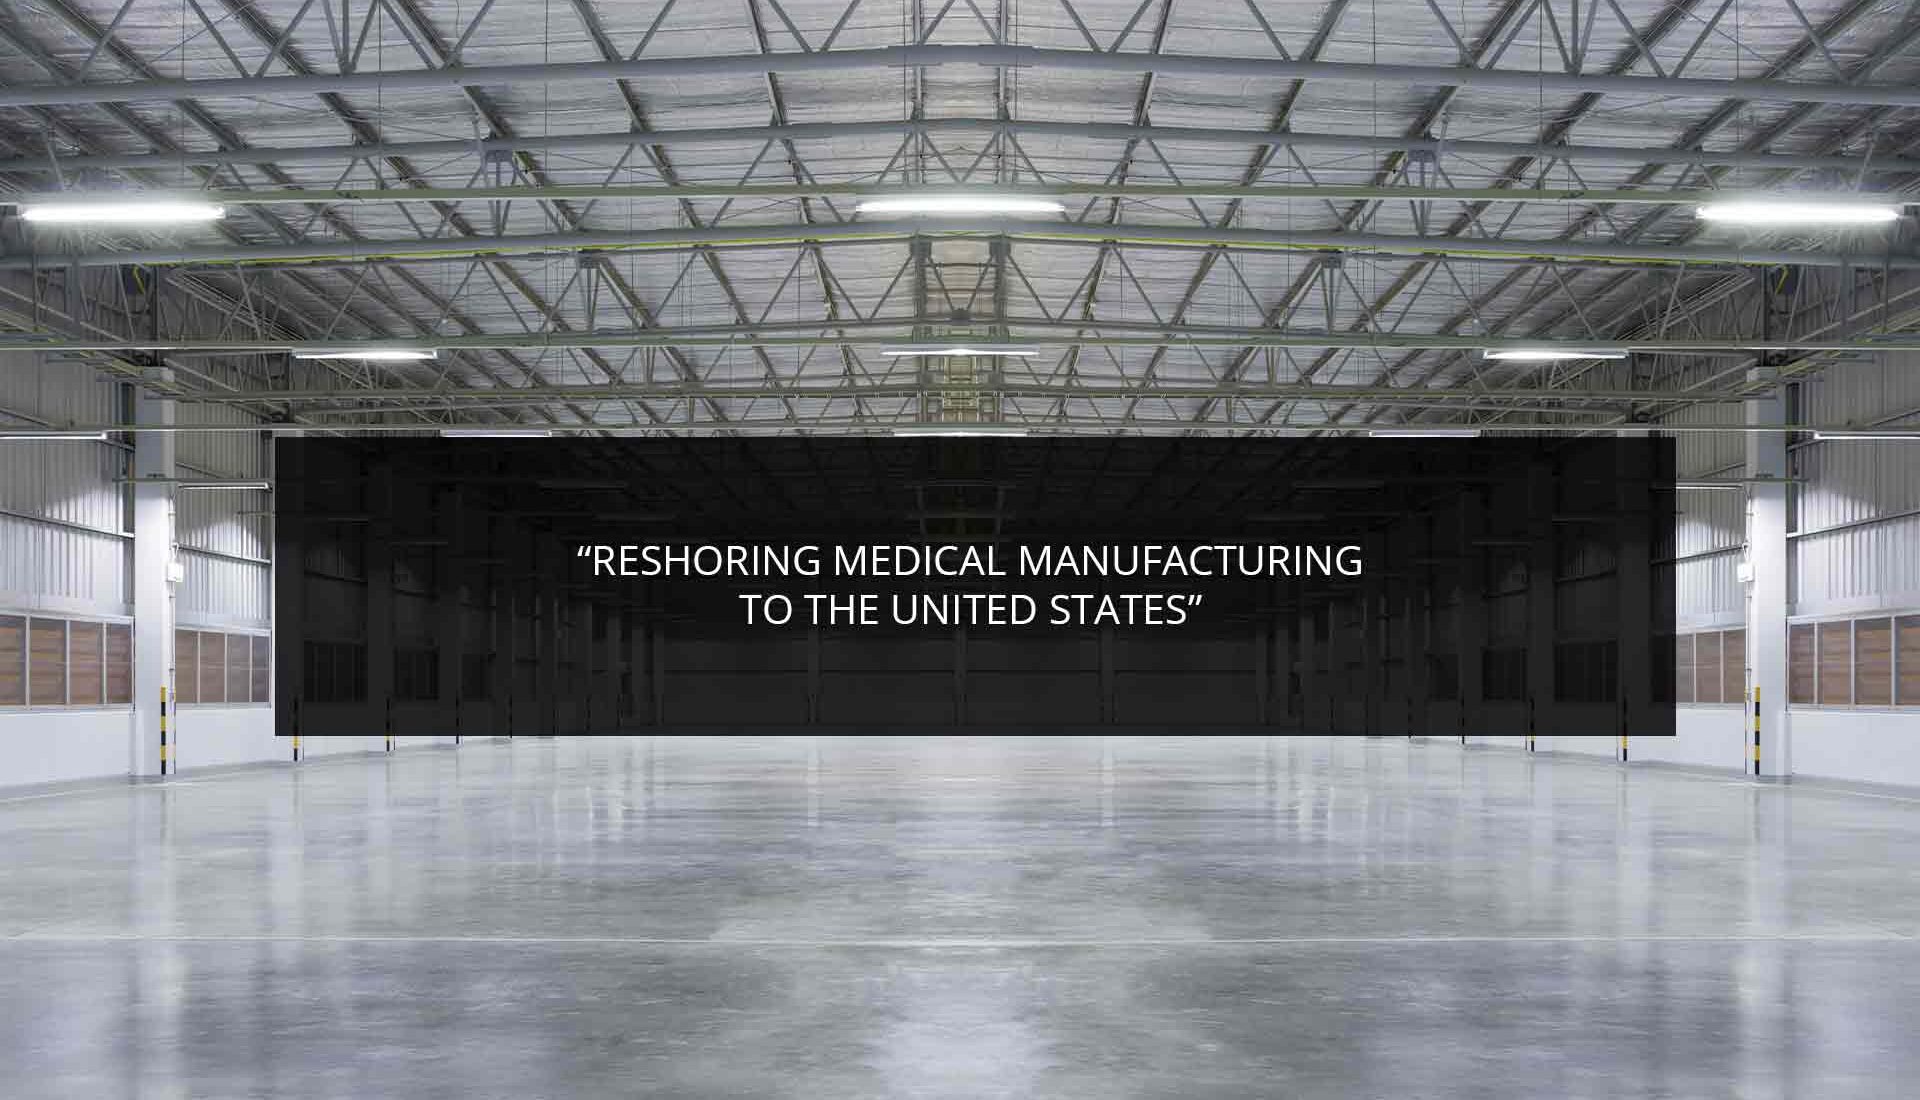 Reshoring Medical Manufacturing to the United States